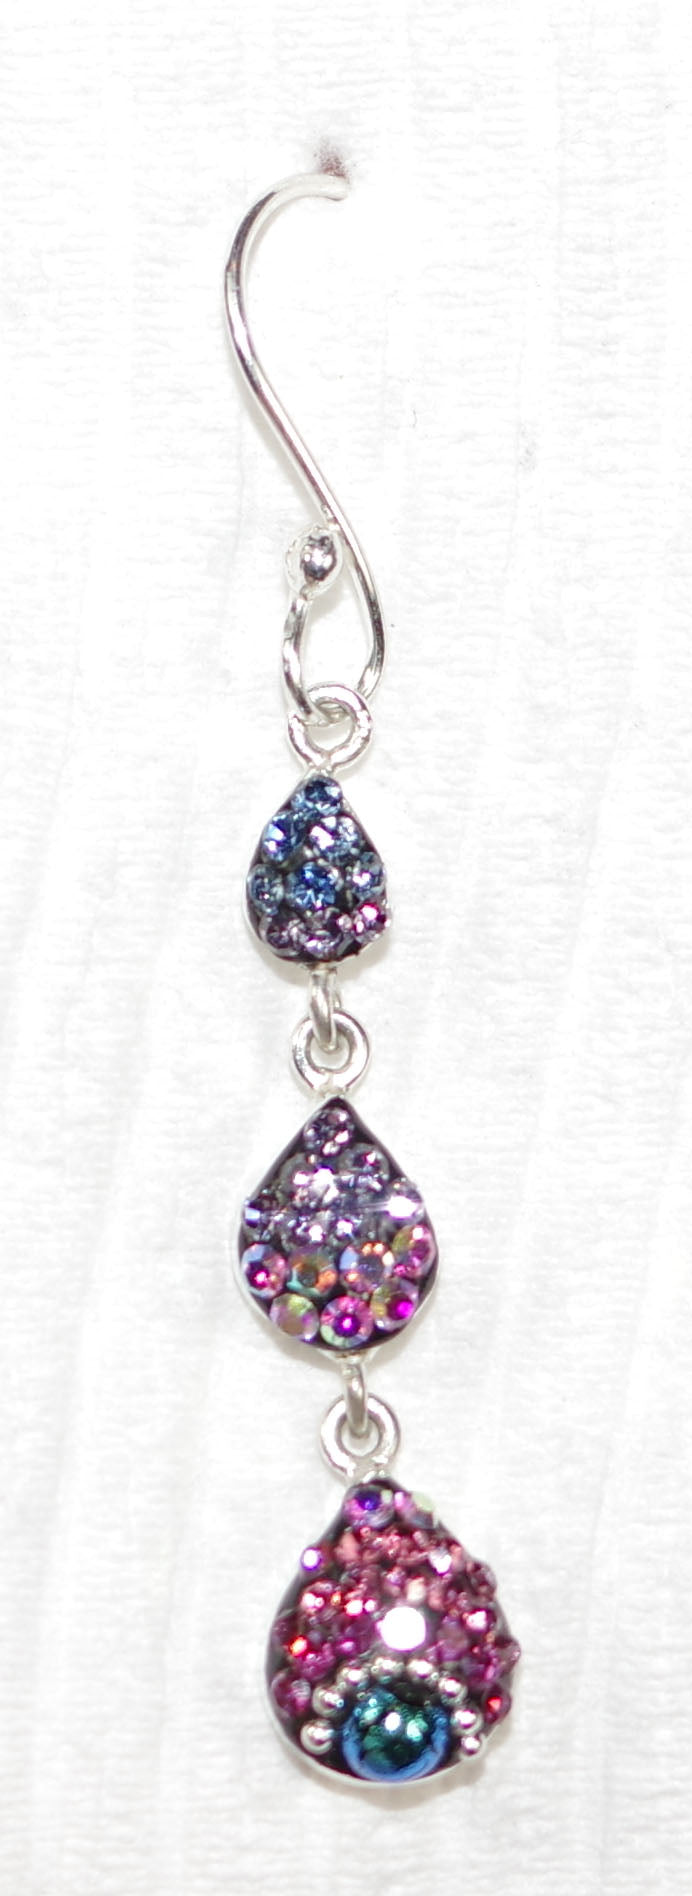 MOSAICO EARRINGS PE-8342-B: multi color Austrians crystals in slender 1.5" solid silver setting, french wire backs